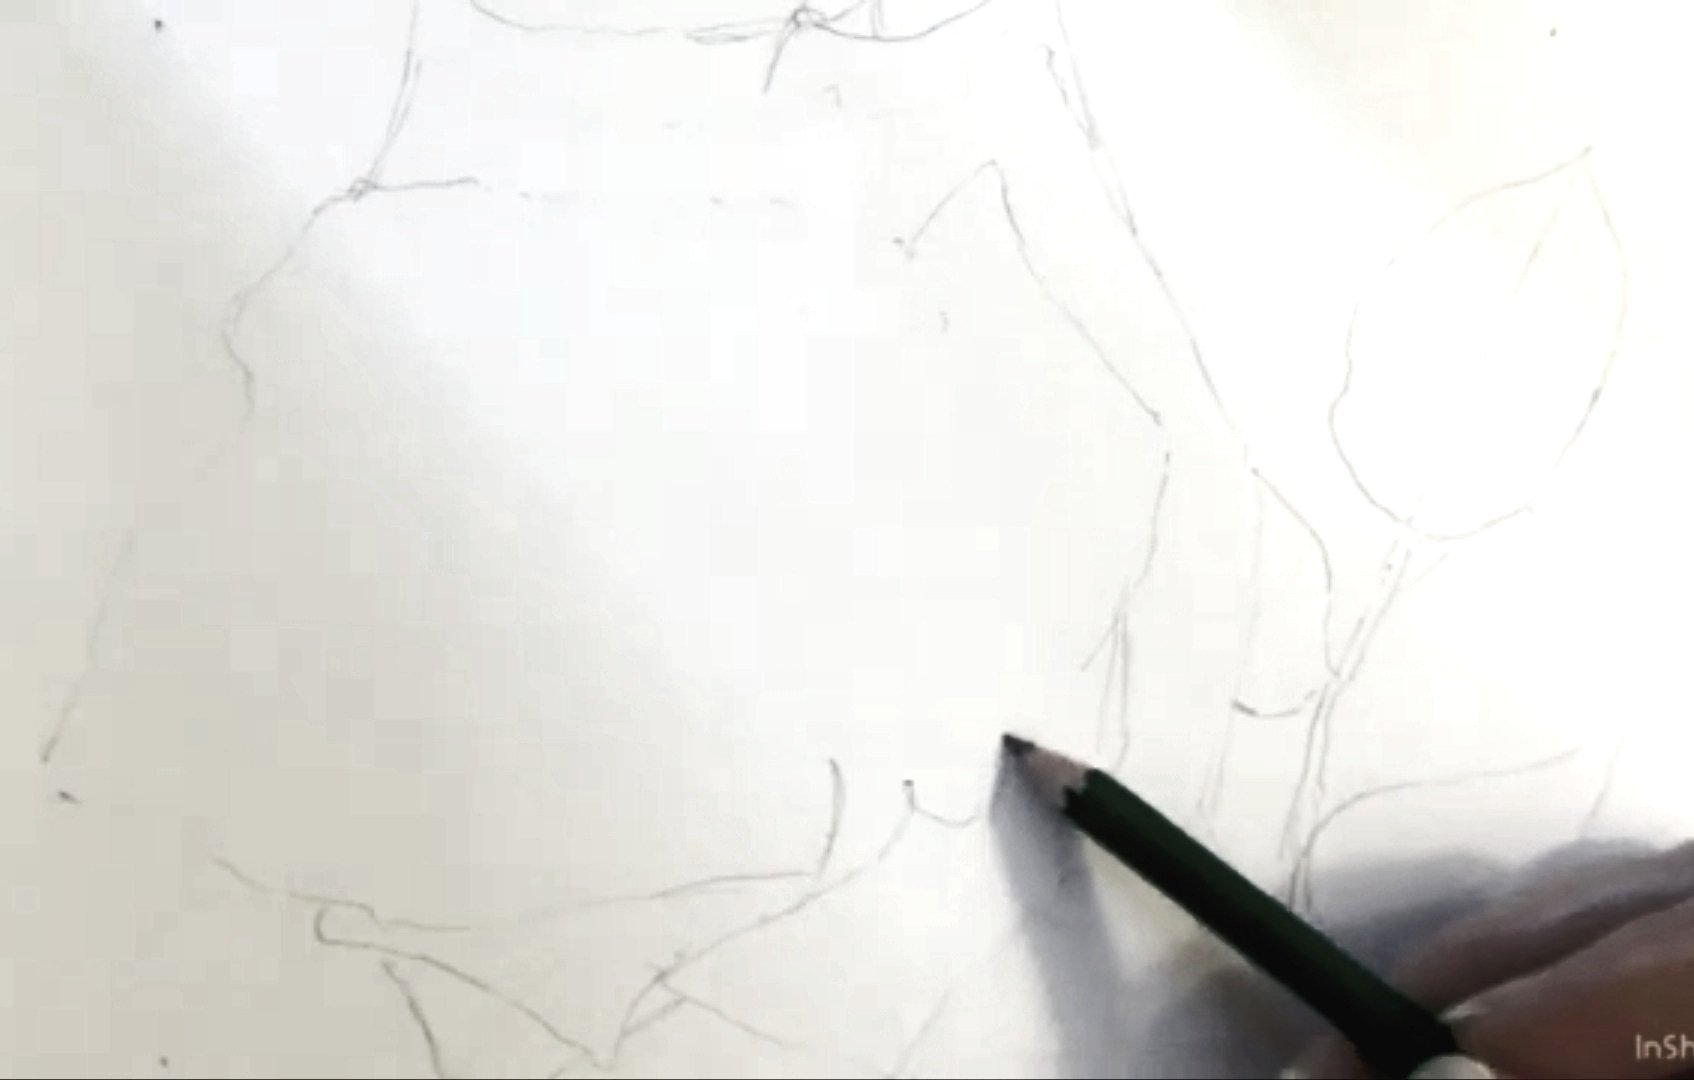 Draw the Outline